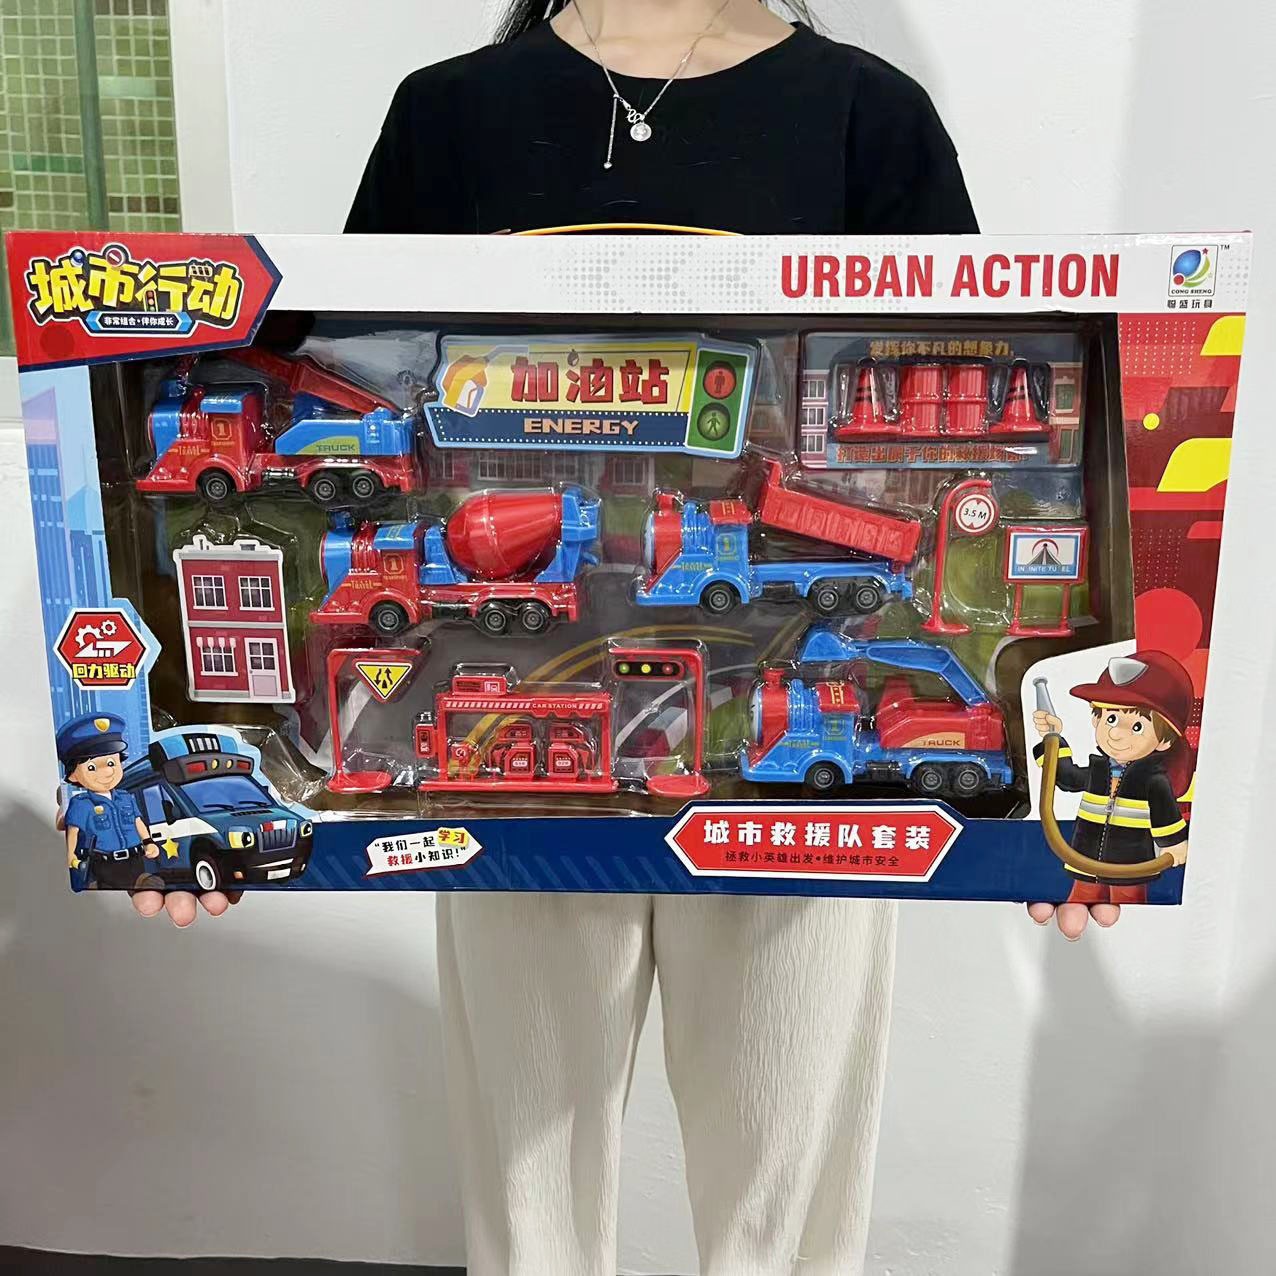 Children's Toys Wholesale Toy Gun Factory Stall Large Boxed 29 Yuan Model Stall Mixed Batch Gift Package